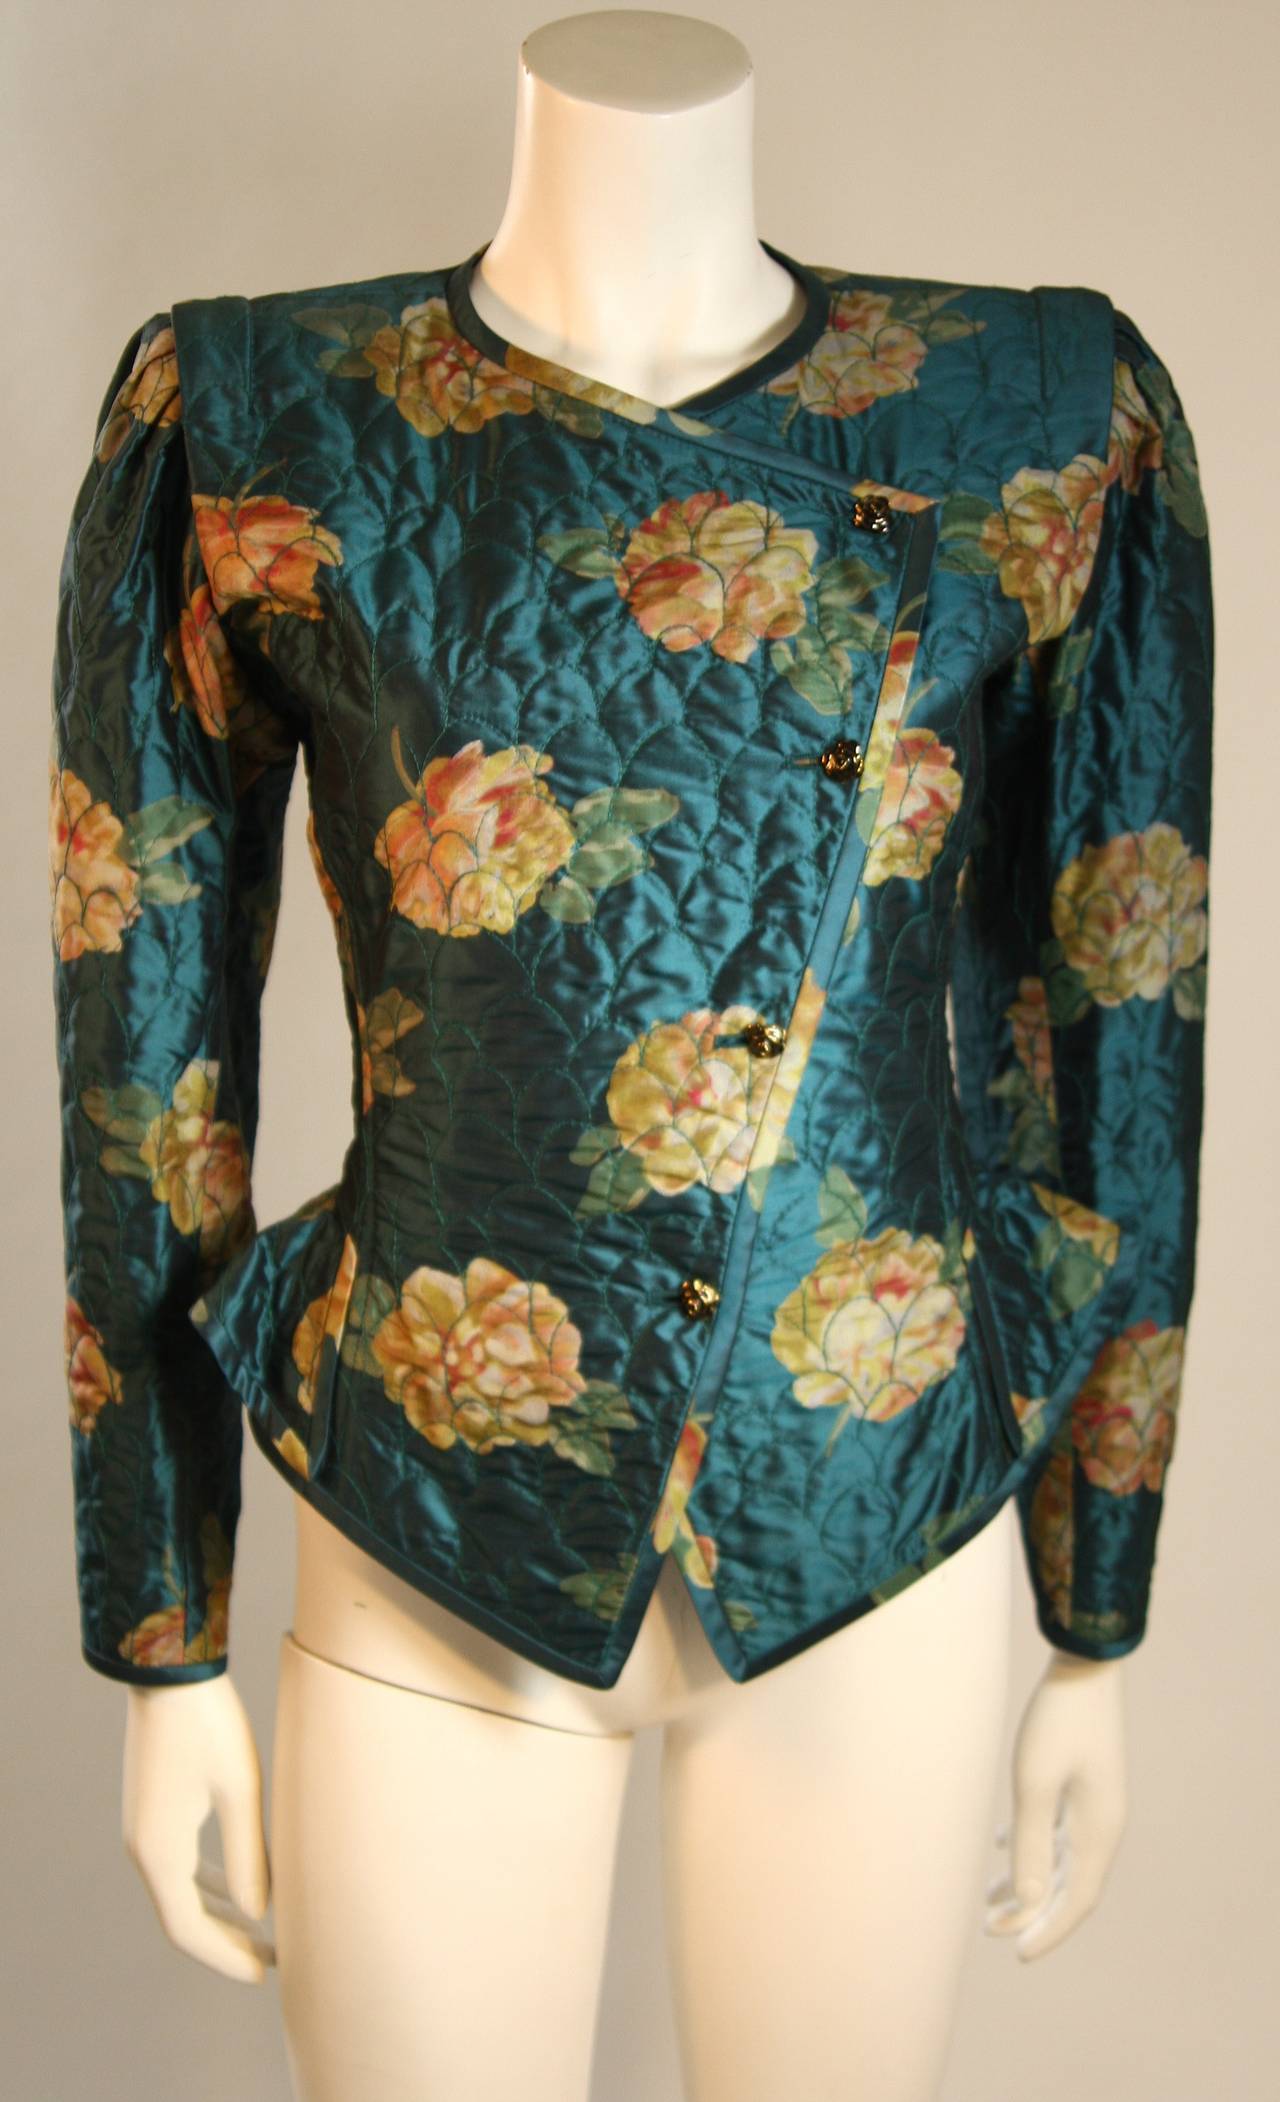 Emanuel Ungaro Teal Floral Skirt Suit with Peplum and Rouching Size 6 For Sale 2